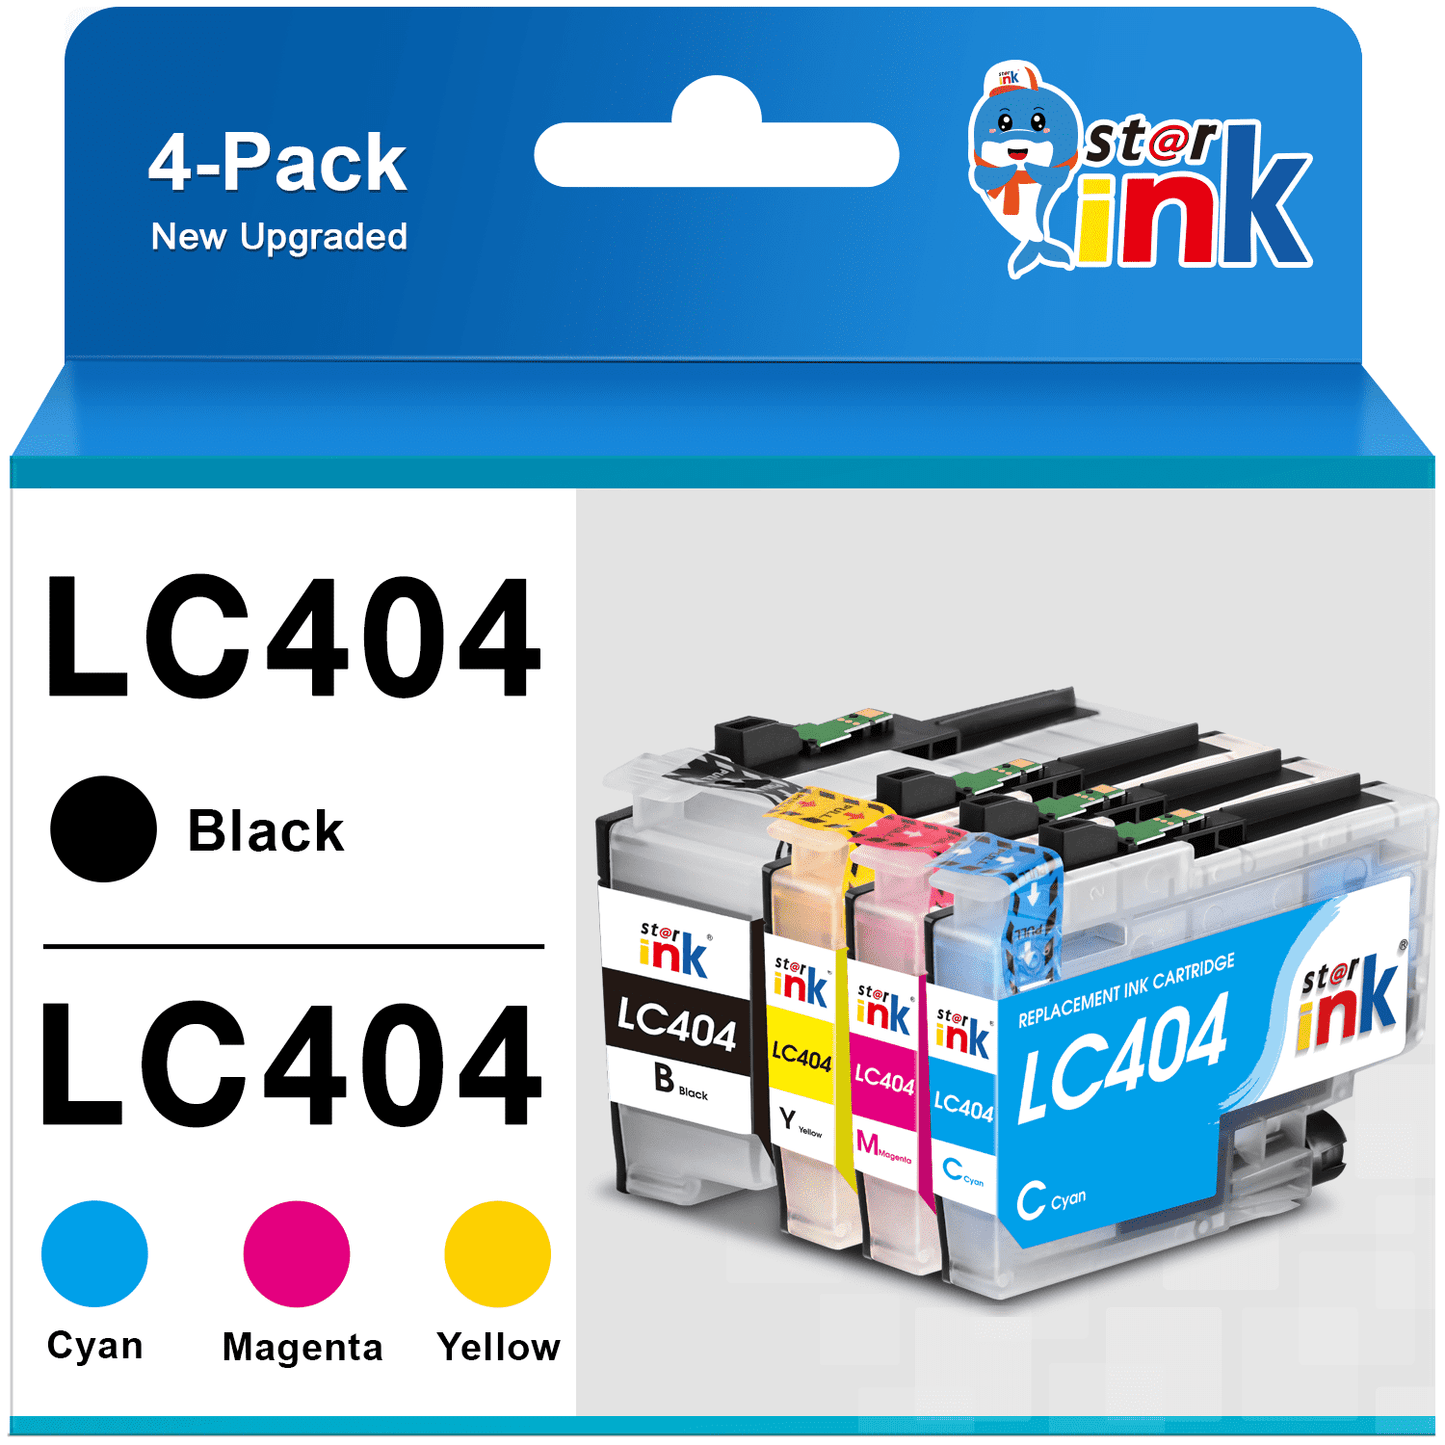 LC404 Ink Cartridges for Brother LC404 LC-404 for Brother MFC-J1205W MFC-J1215W MFC-J1205W XL Printer (Black Cyan Magenta Yellow, 4 Pack)